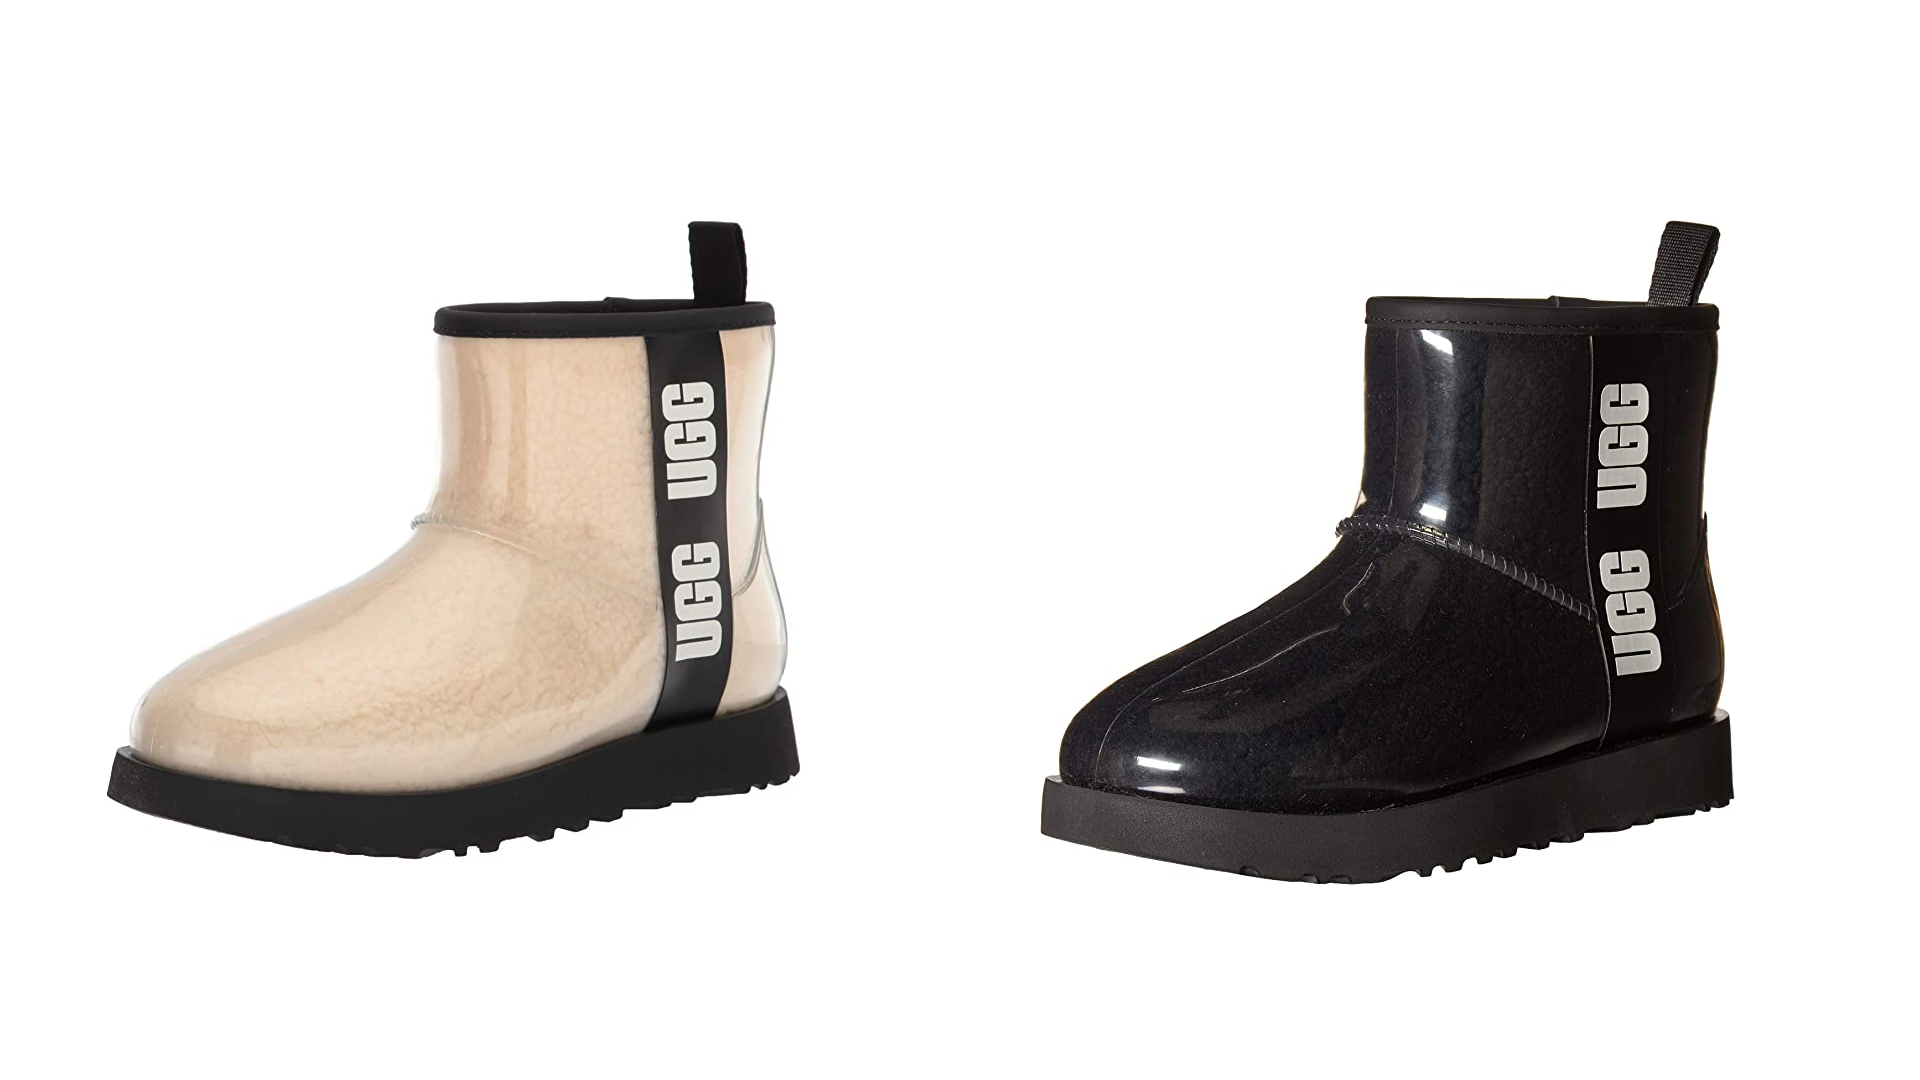 A weather-resistant take on traditional Uggs…